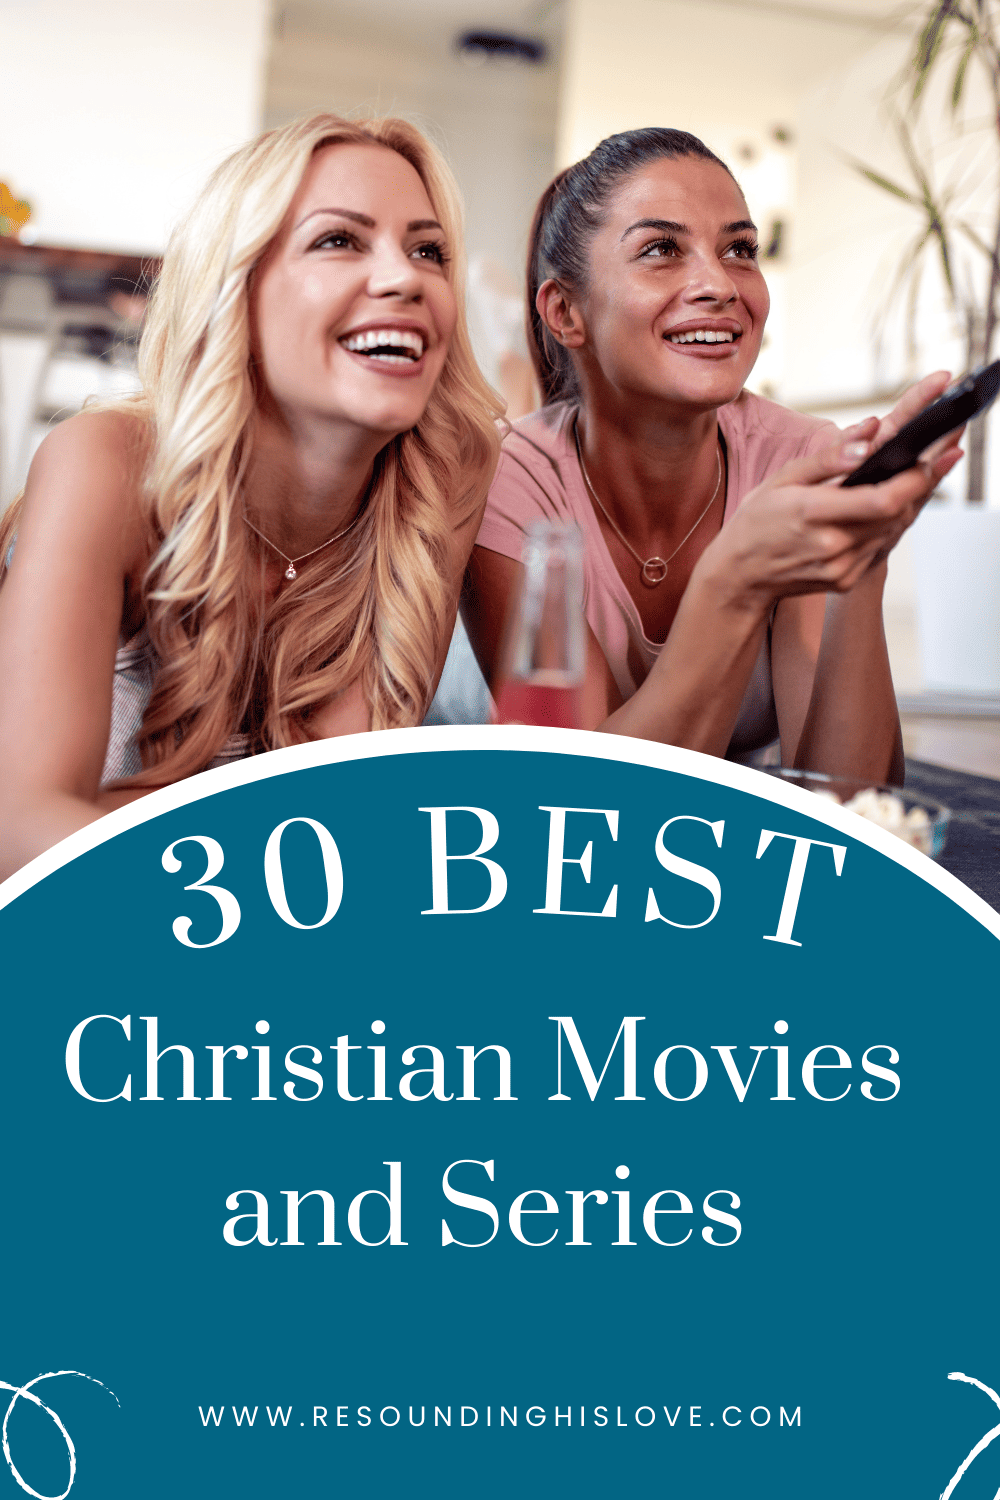 30 Best Christian Movies and Series You Need To Watch Now